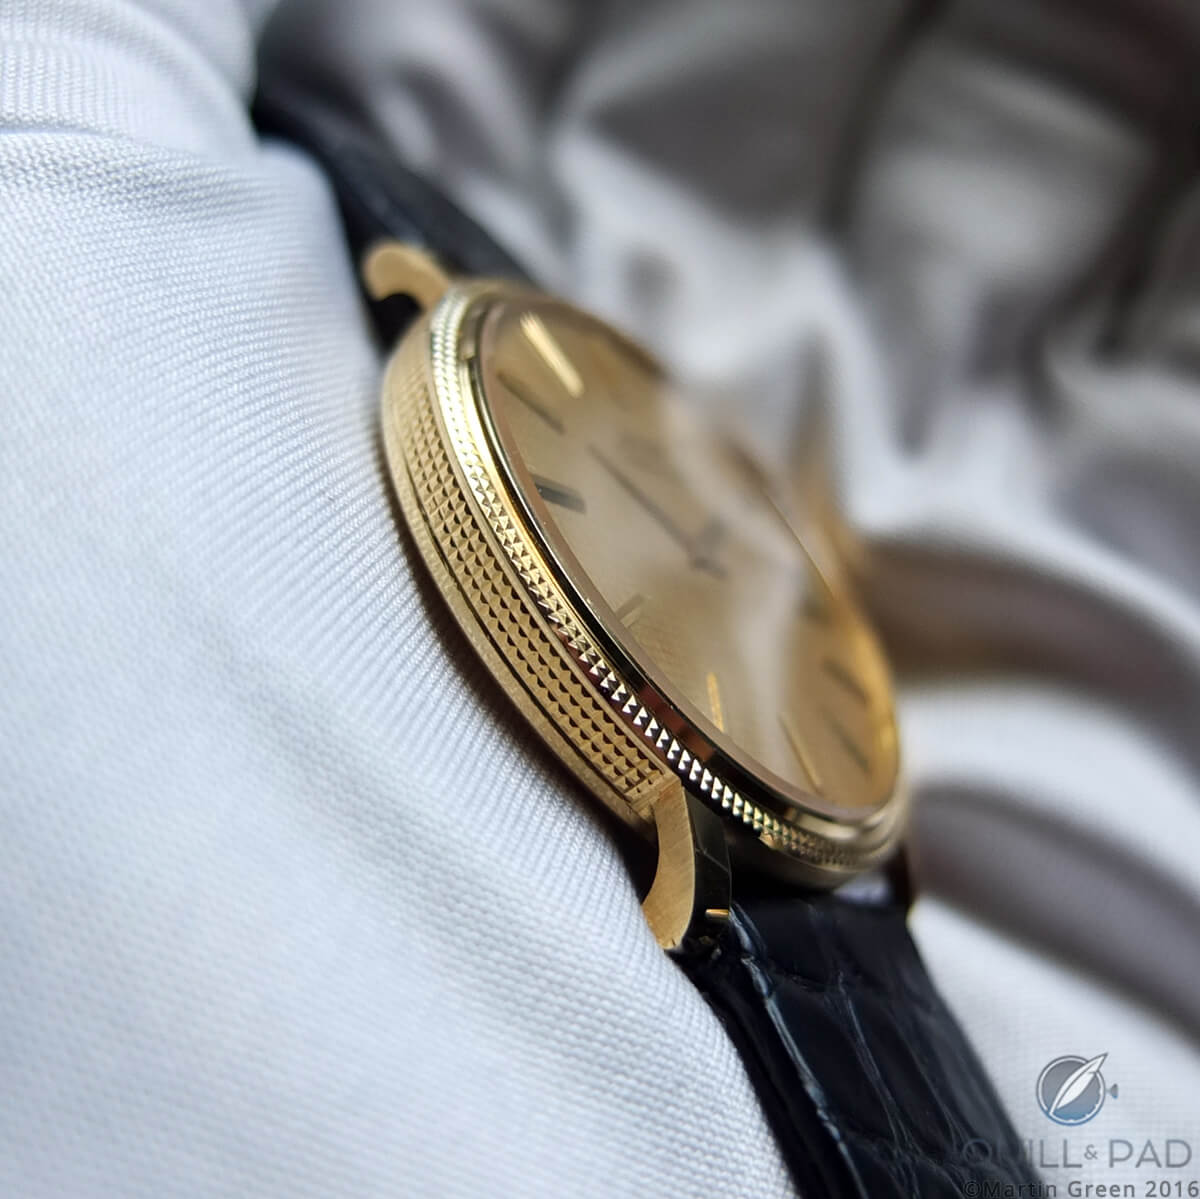 The slim profile of a beautiful ultra-thin Piaget Caliber 12P model from 1969